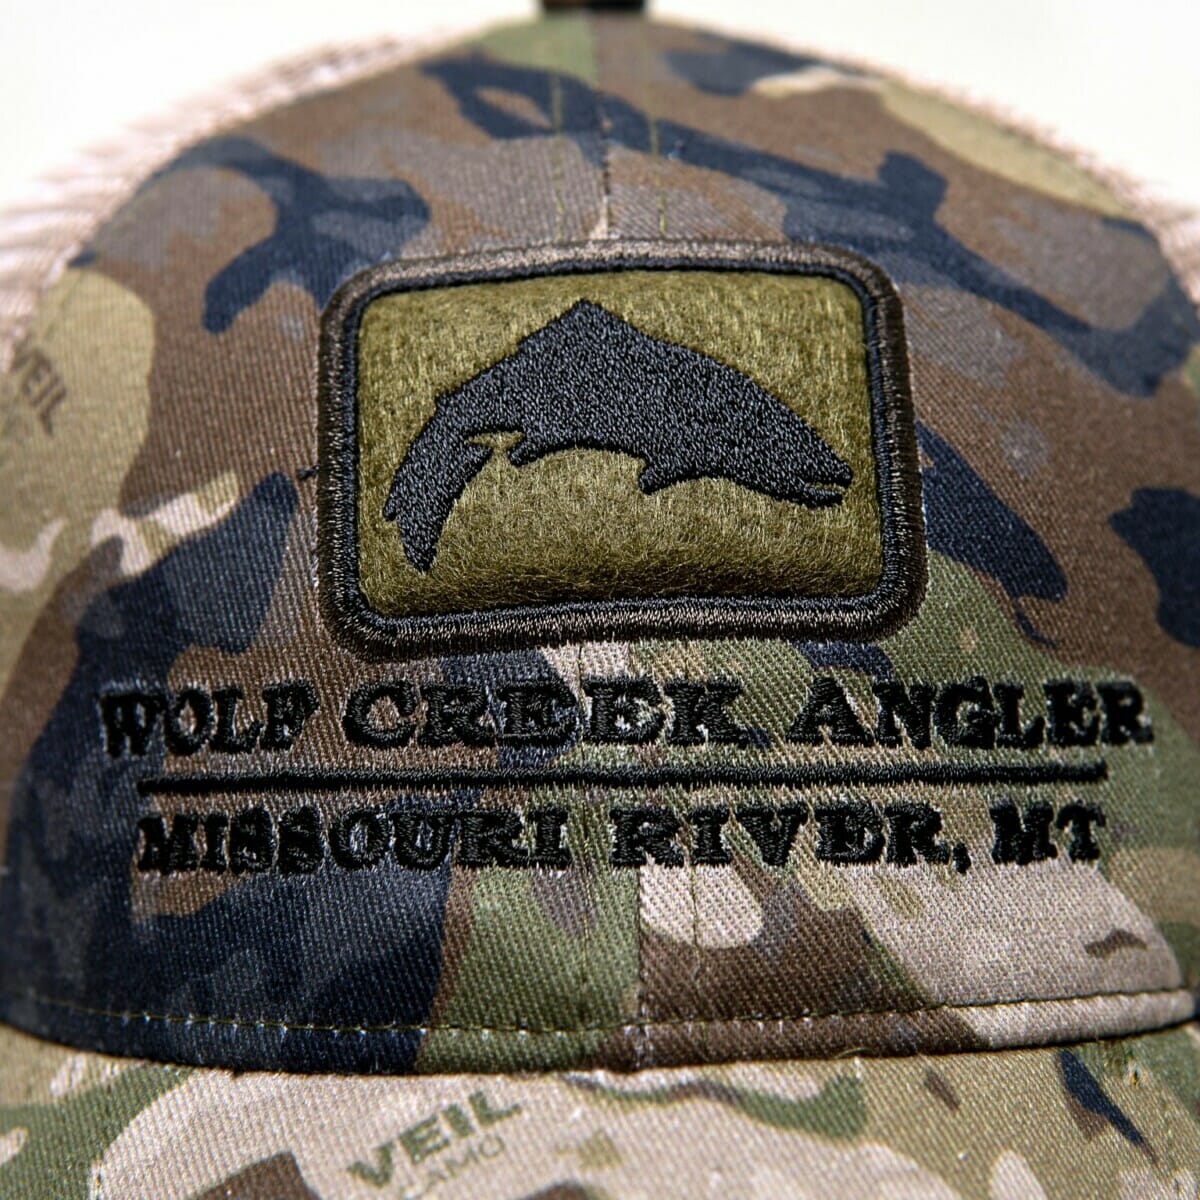 Simms Trout Patch Trucker Hex Camo Carbon Cap - Armadale Angling